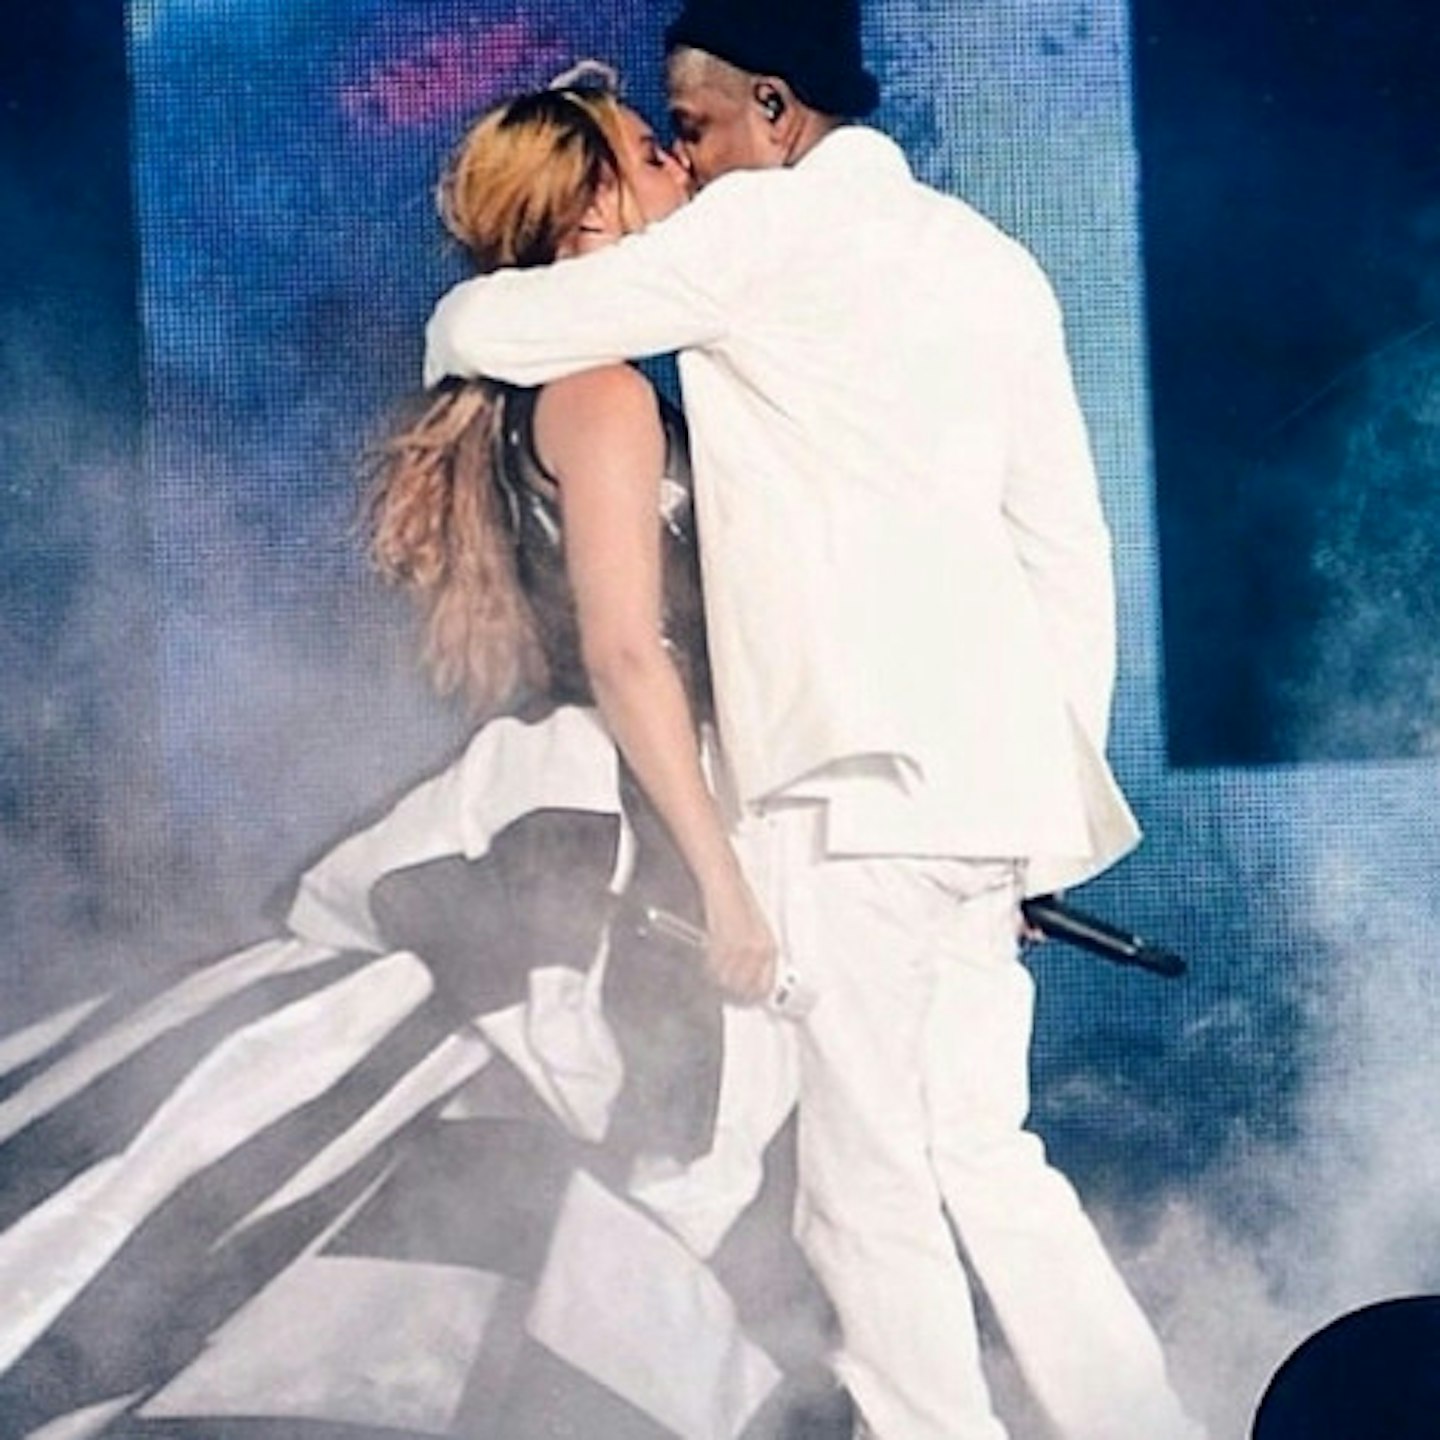 Beyonce and Jay shared a kiss on stage